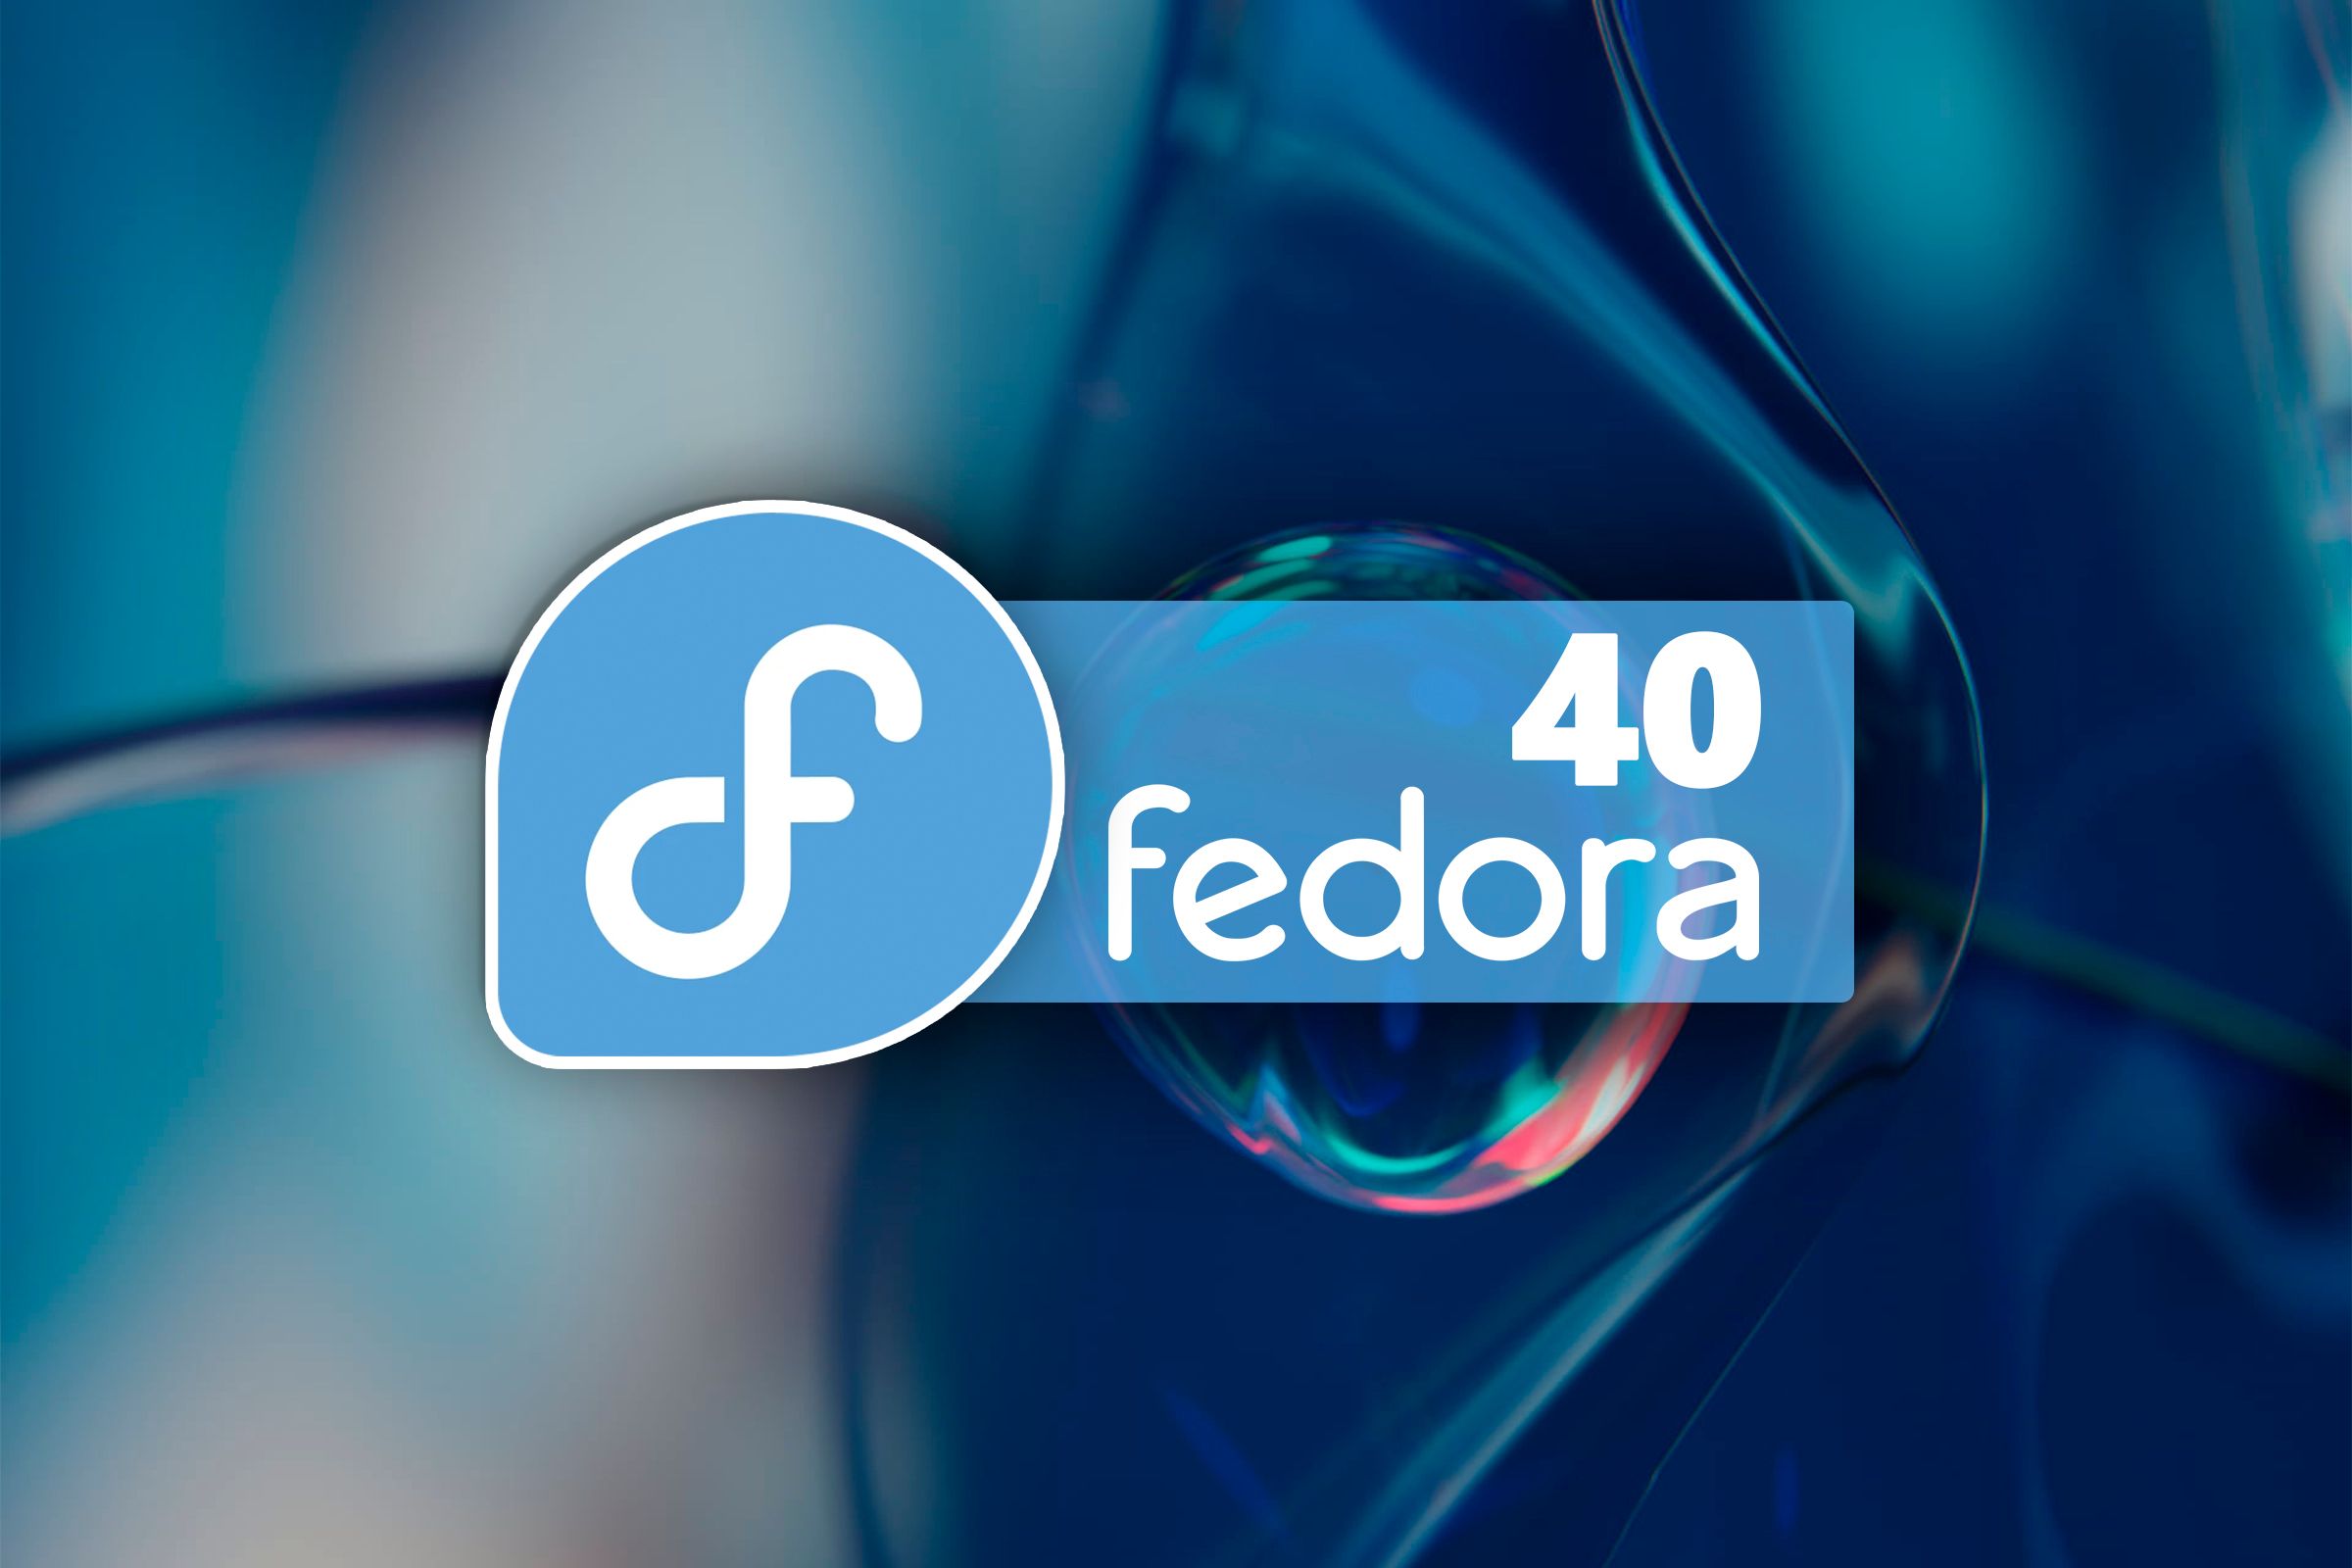 Default Fedora 40 background with Fedora 40 word and logo